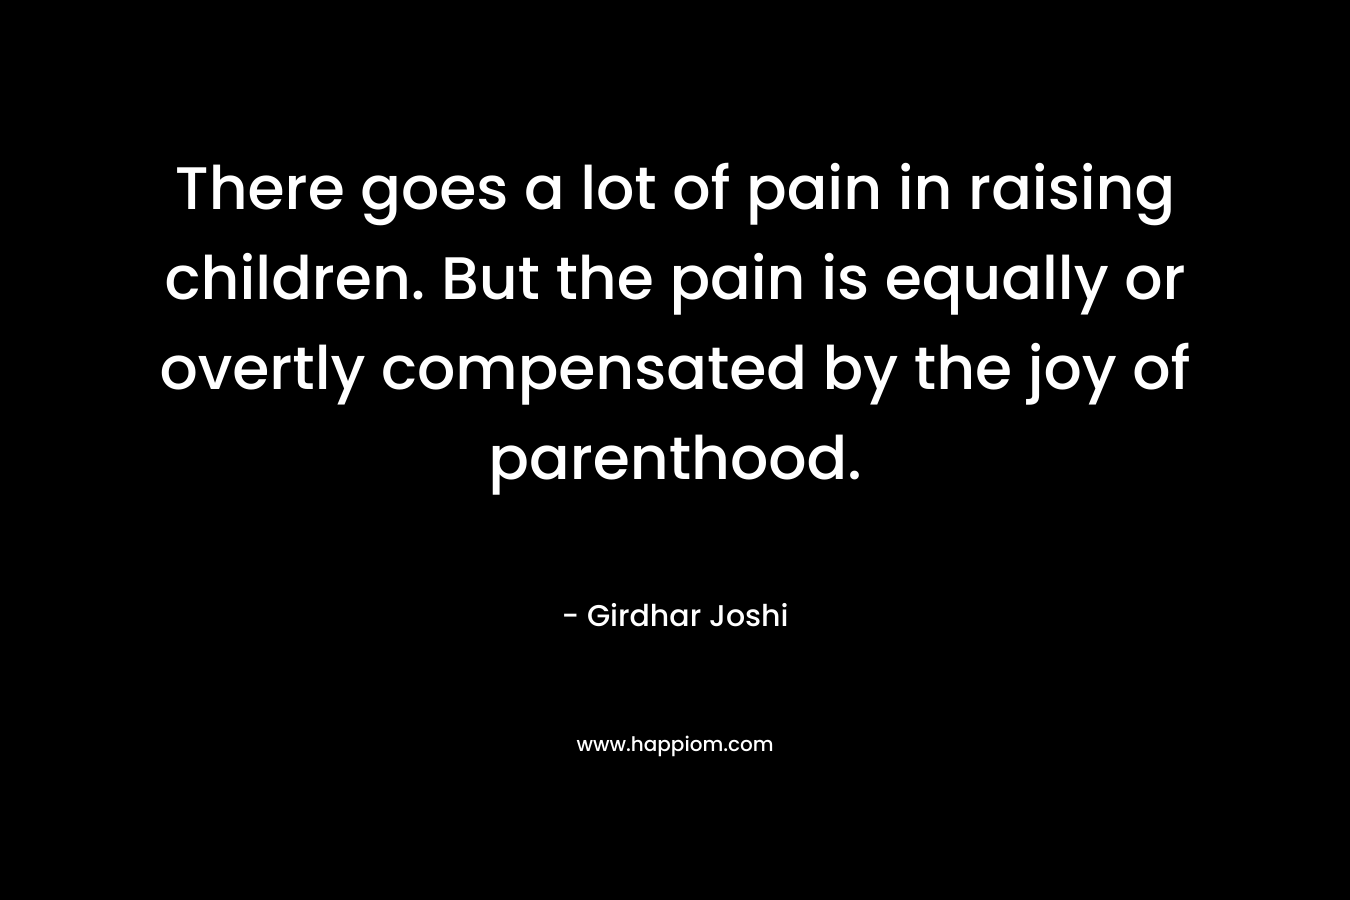 There goes a lot of pain in raising children. But the pain is equally or overtly compensated by the joy of parenthood. – Girdhar Joshi